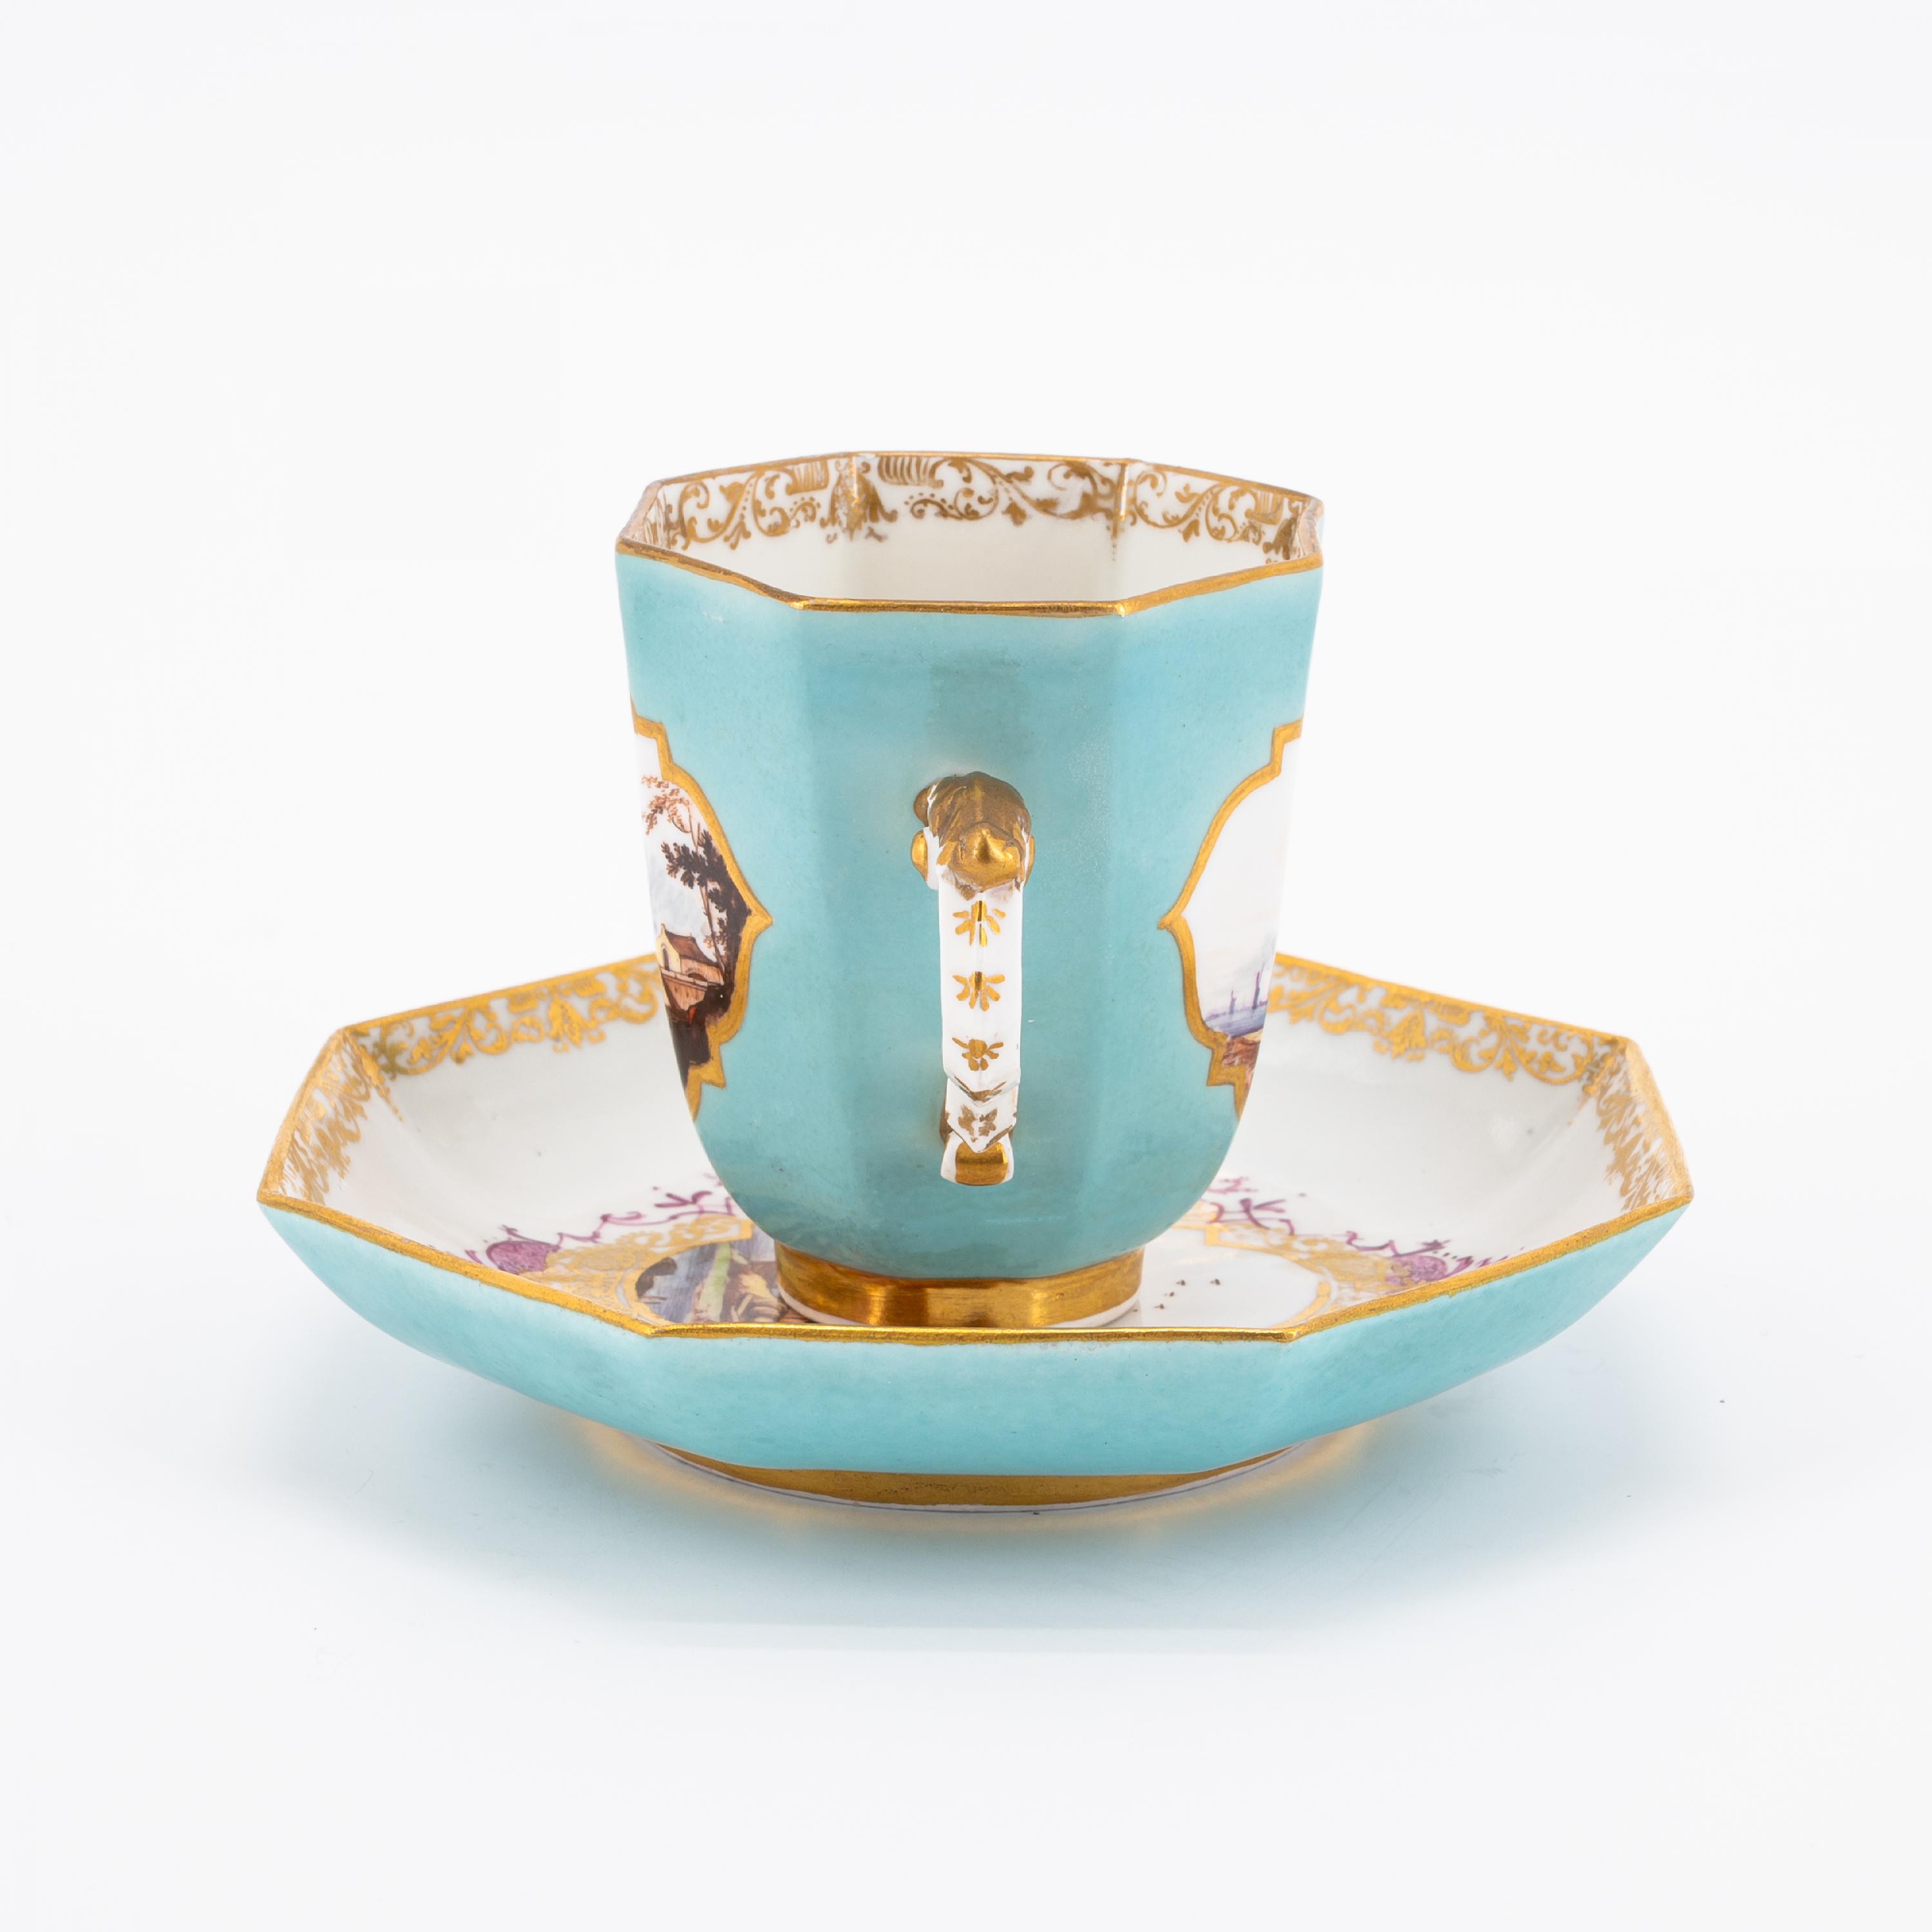 OCTAGONAL PORCELAIN CREAM JUG; HANDLES CUP AND SAUCER WITH TURQUOISE BACKGROUND AND LANDSCAPE DECORA - Image 2 of 11